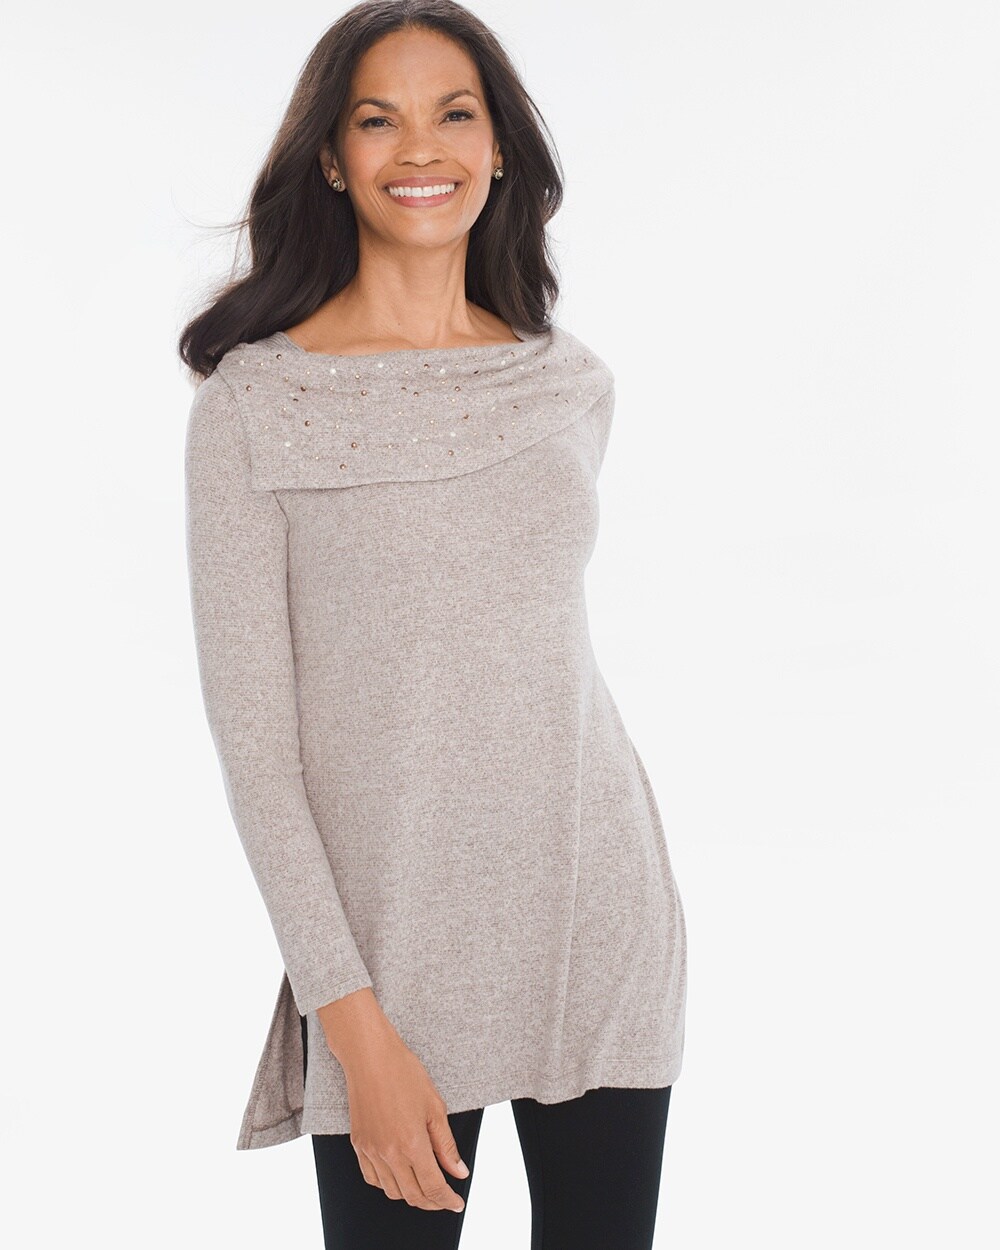 Zenergy Knit Collection Cozy Jewel Pullover